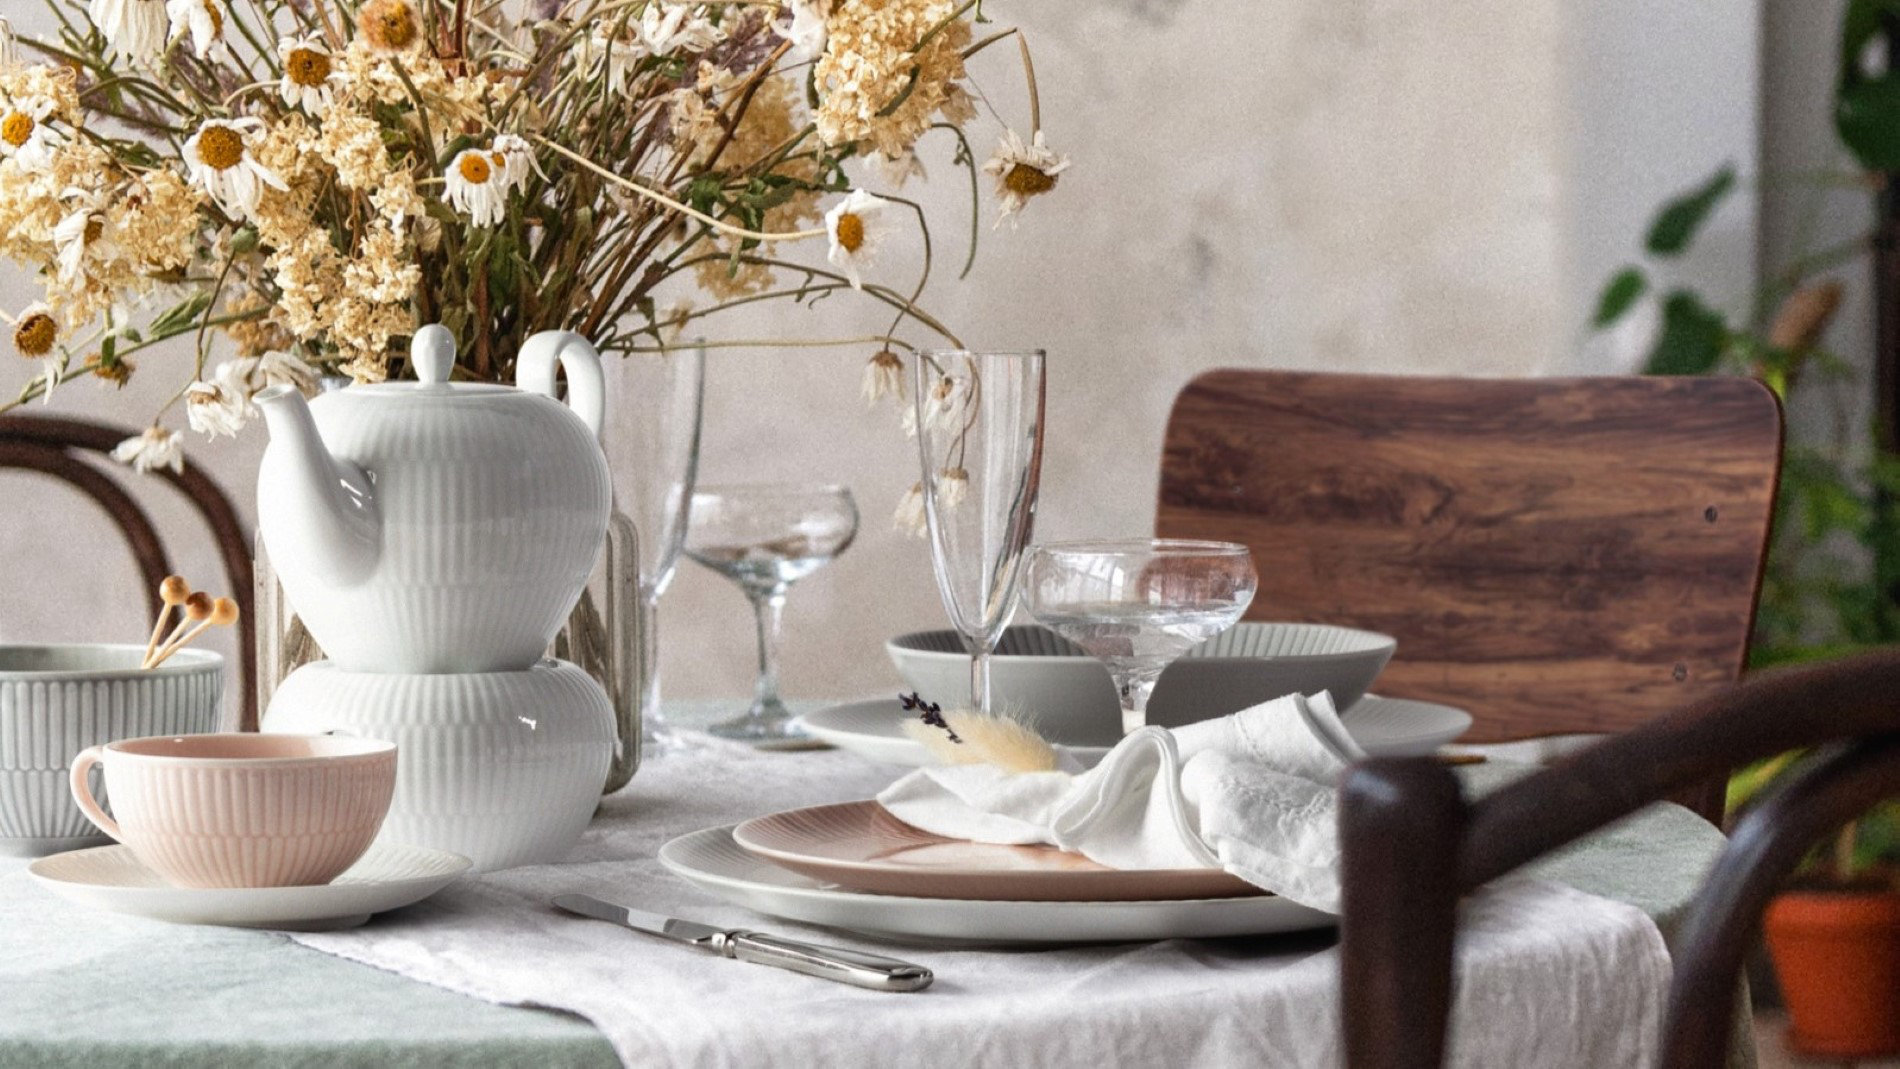 Tableware from the "Amina" collection by Seltmann Weiden on a table